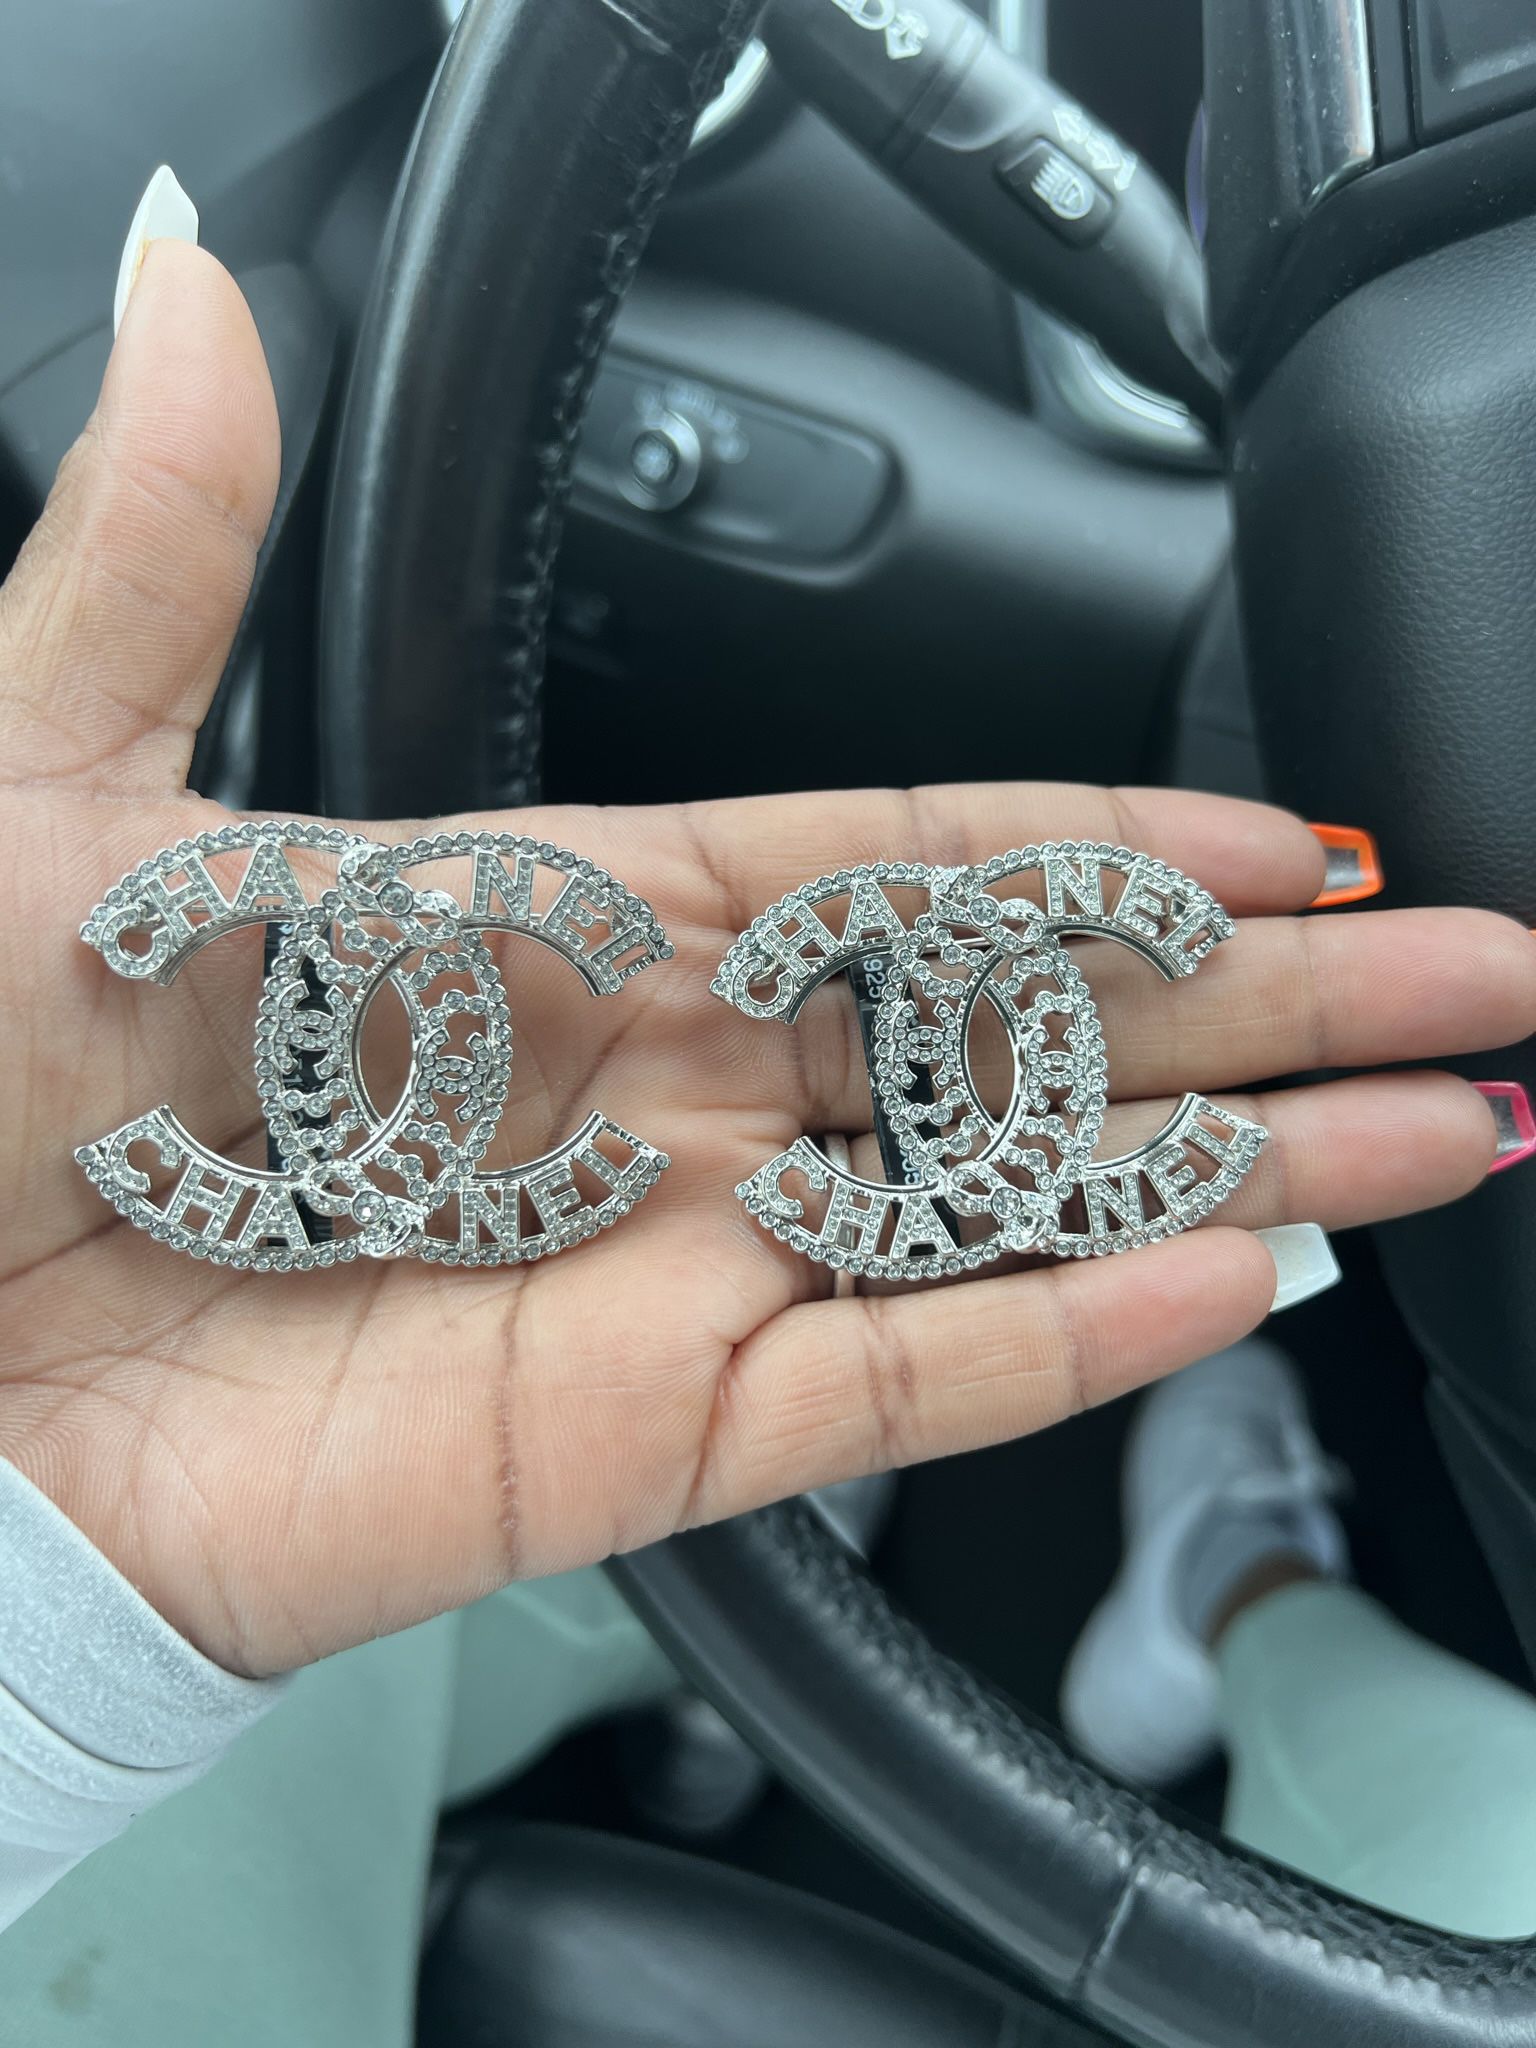 Chanel Brooch for Sale in Chicago, IL - OfferUp